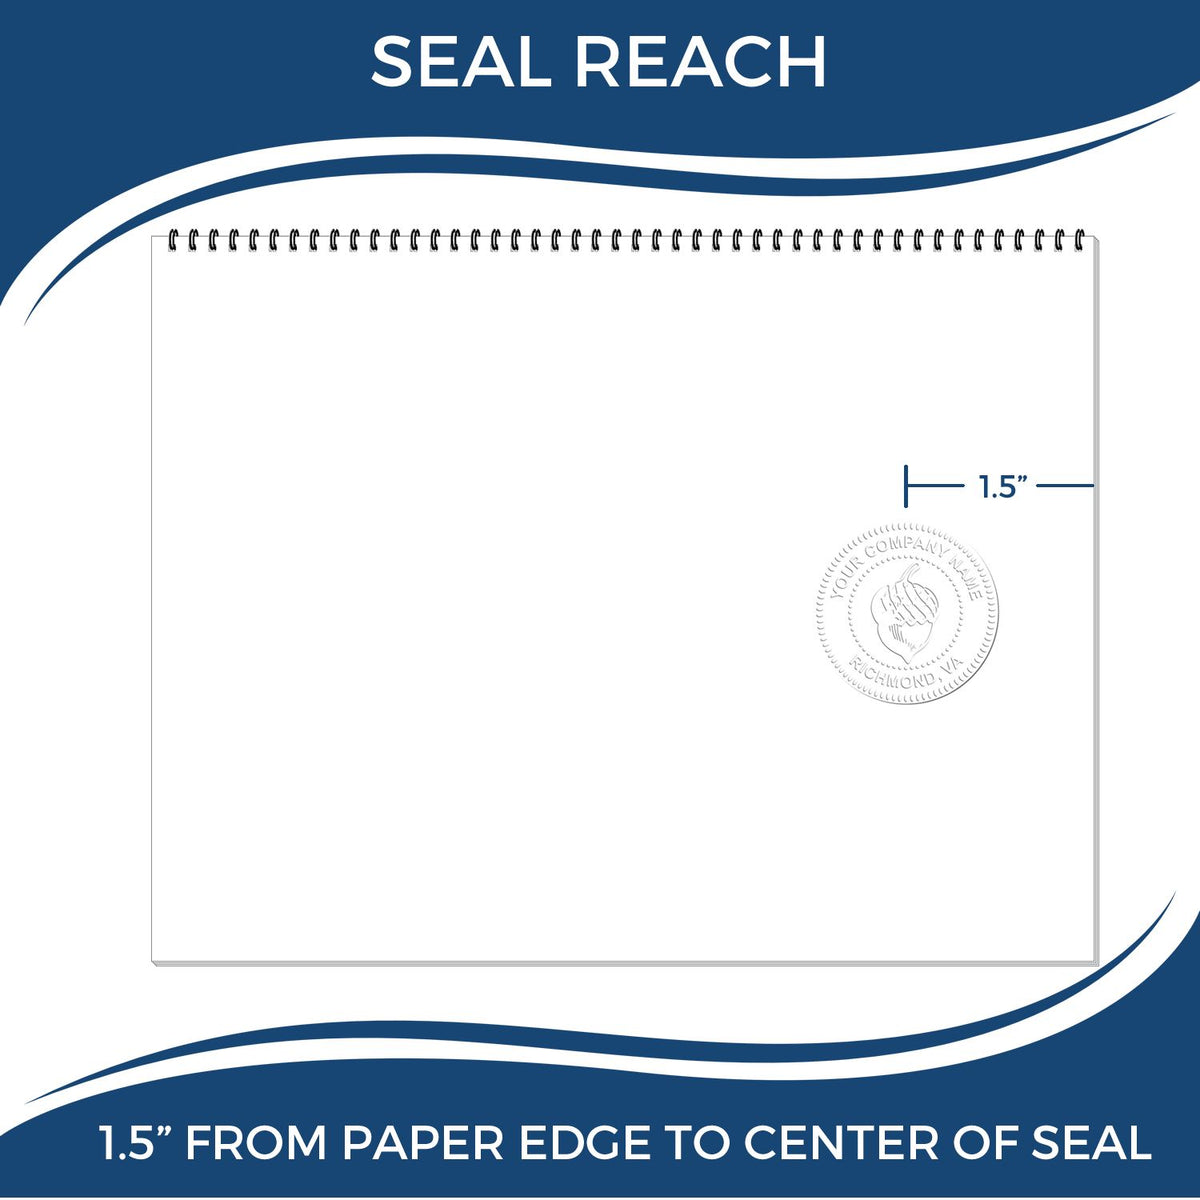 An infographic showing the seal reach which is represented by a ruler and a miniature seal image of the Hybrid Nevada Engineer Seal